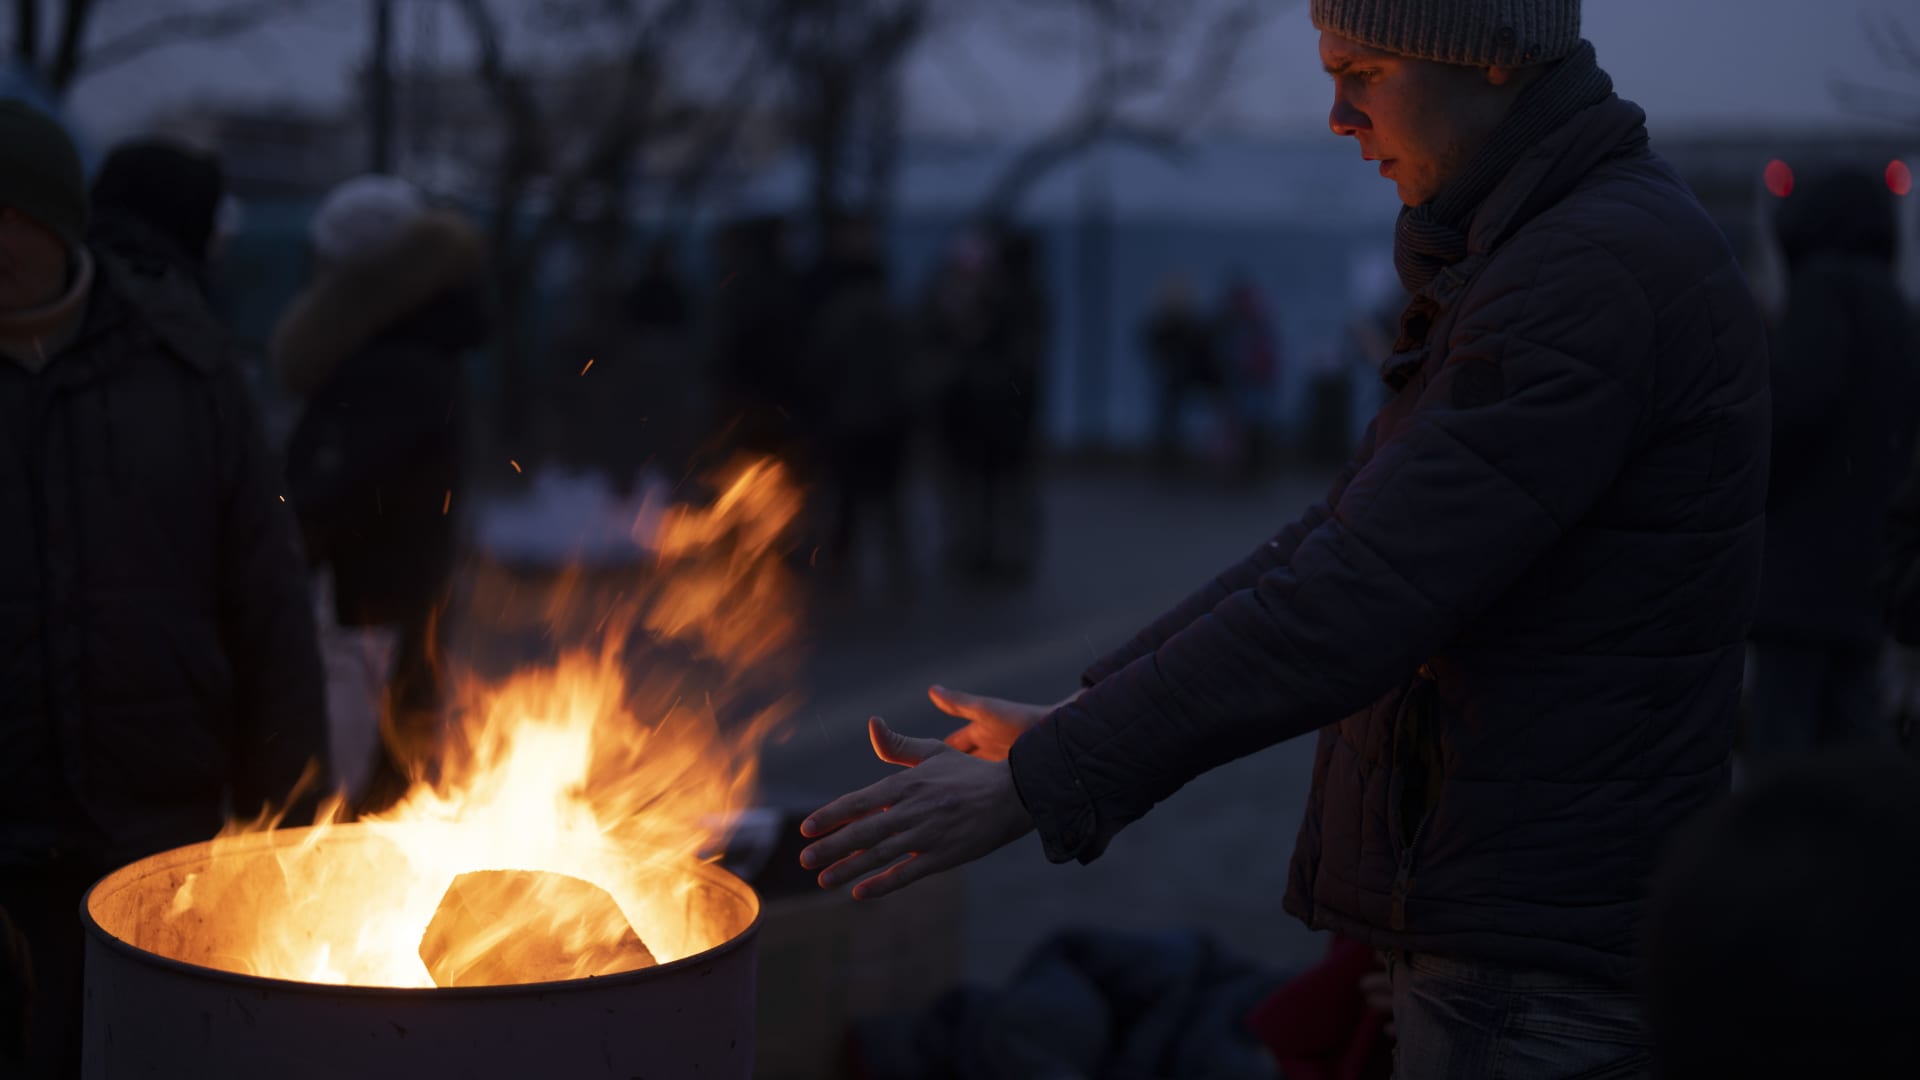 'There may be no light for a very long time': Ukrainians face a massive test of survival this winter